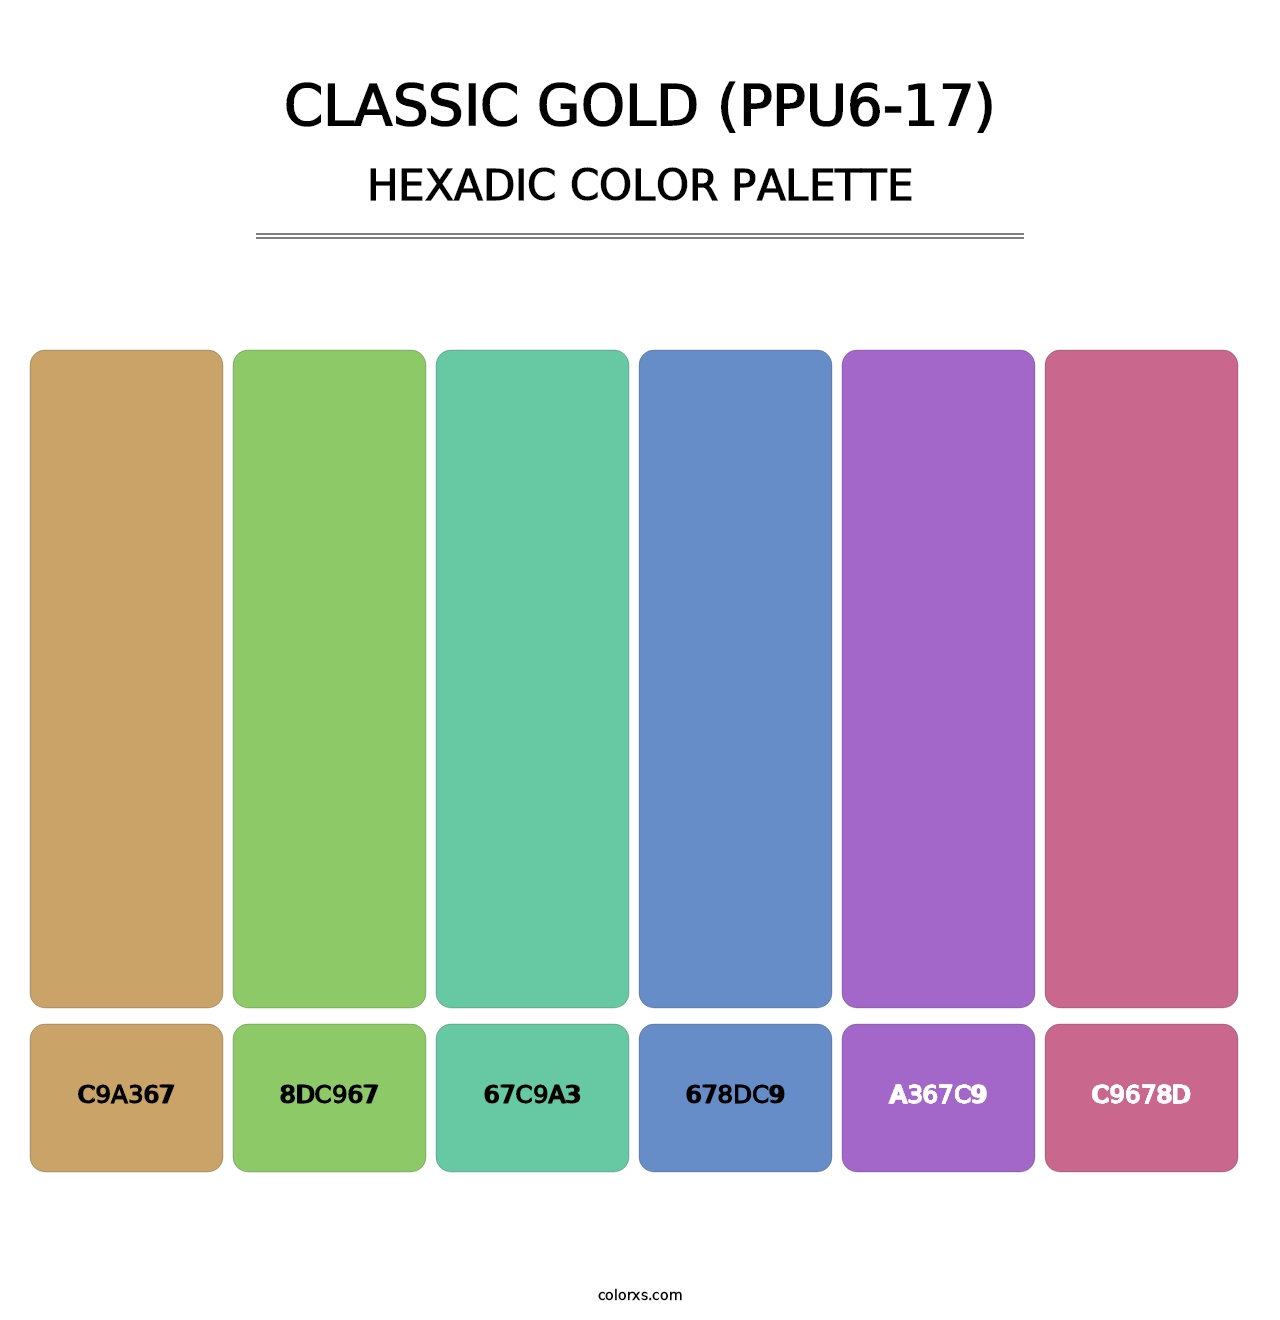 Classic Gold (PPU6-17) - Hexadic Color Palette